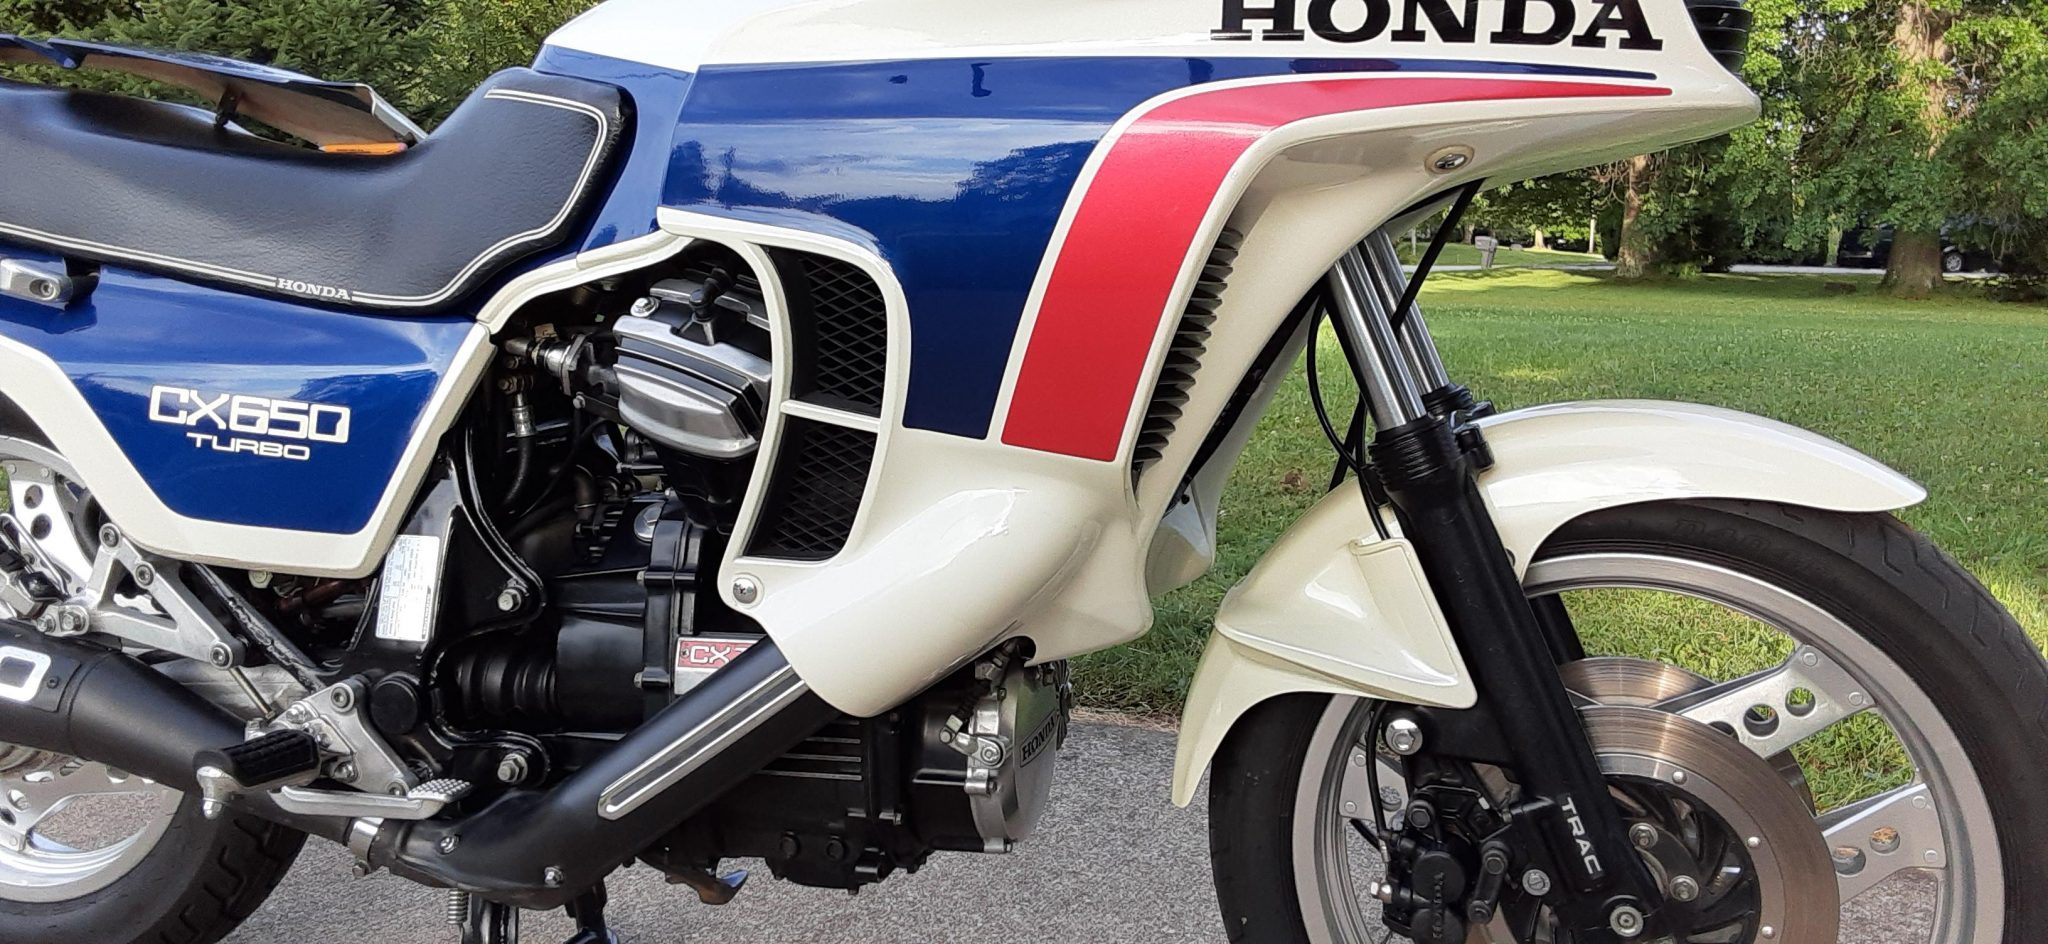 19 Honda Cx650 Turbo Sits On Upgraded Suspension And Dunlop Footwear Autoevolution